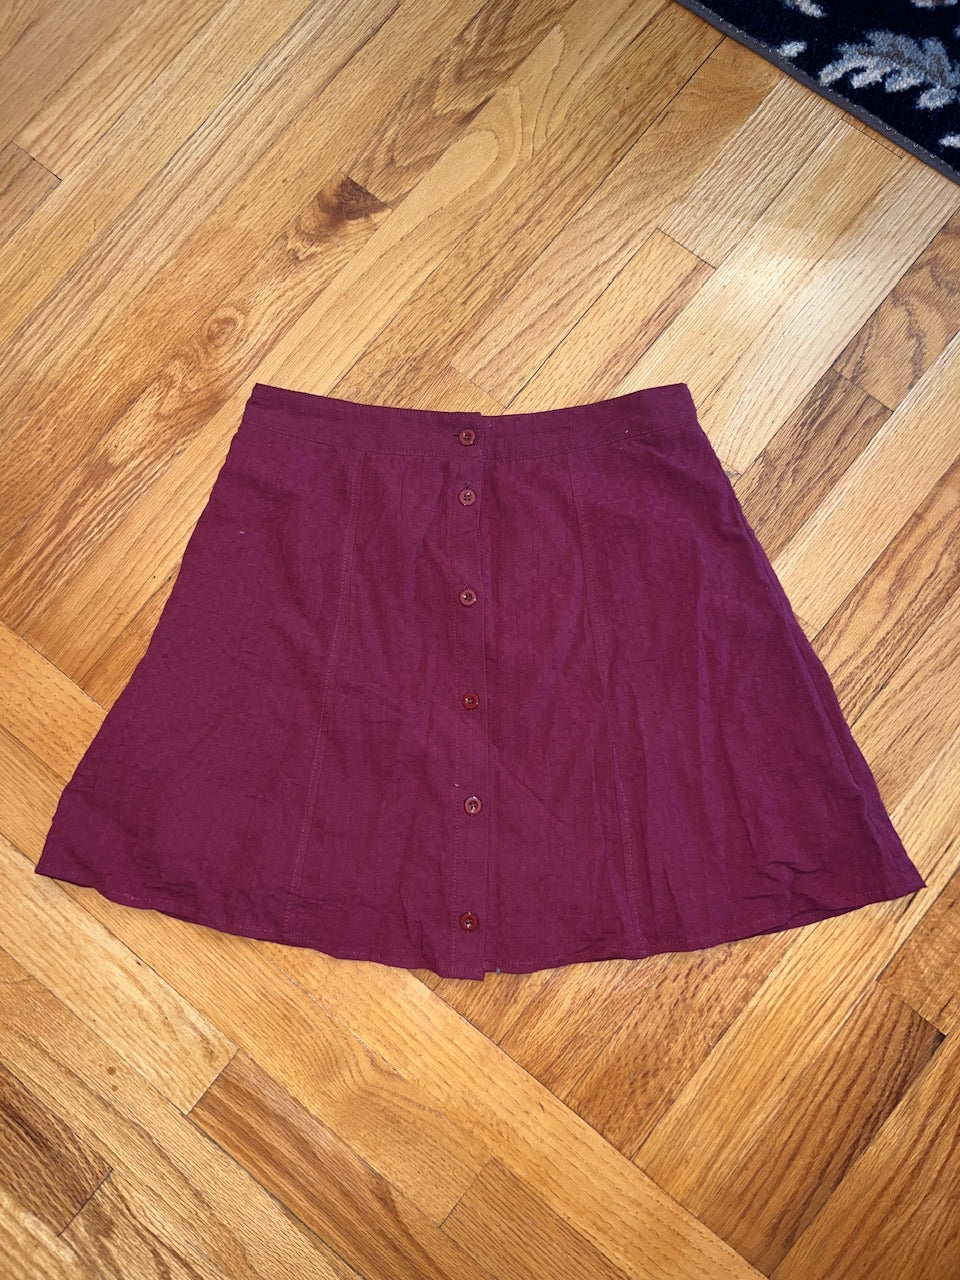 Fashion On Earth Crimson cotton Skirt size small Adult Small